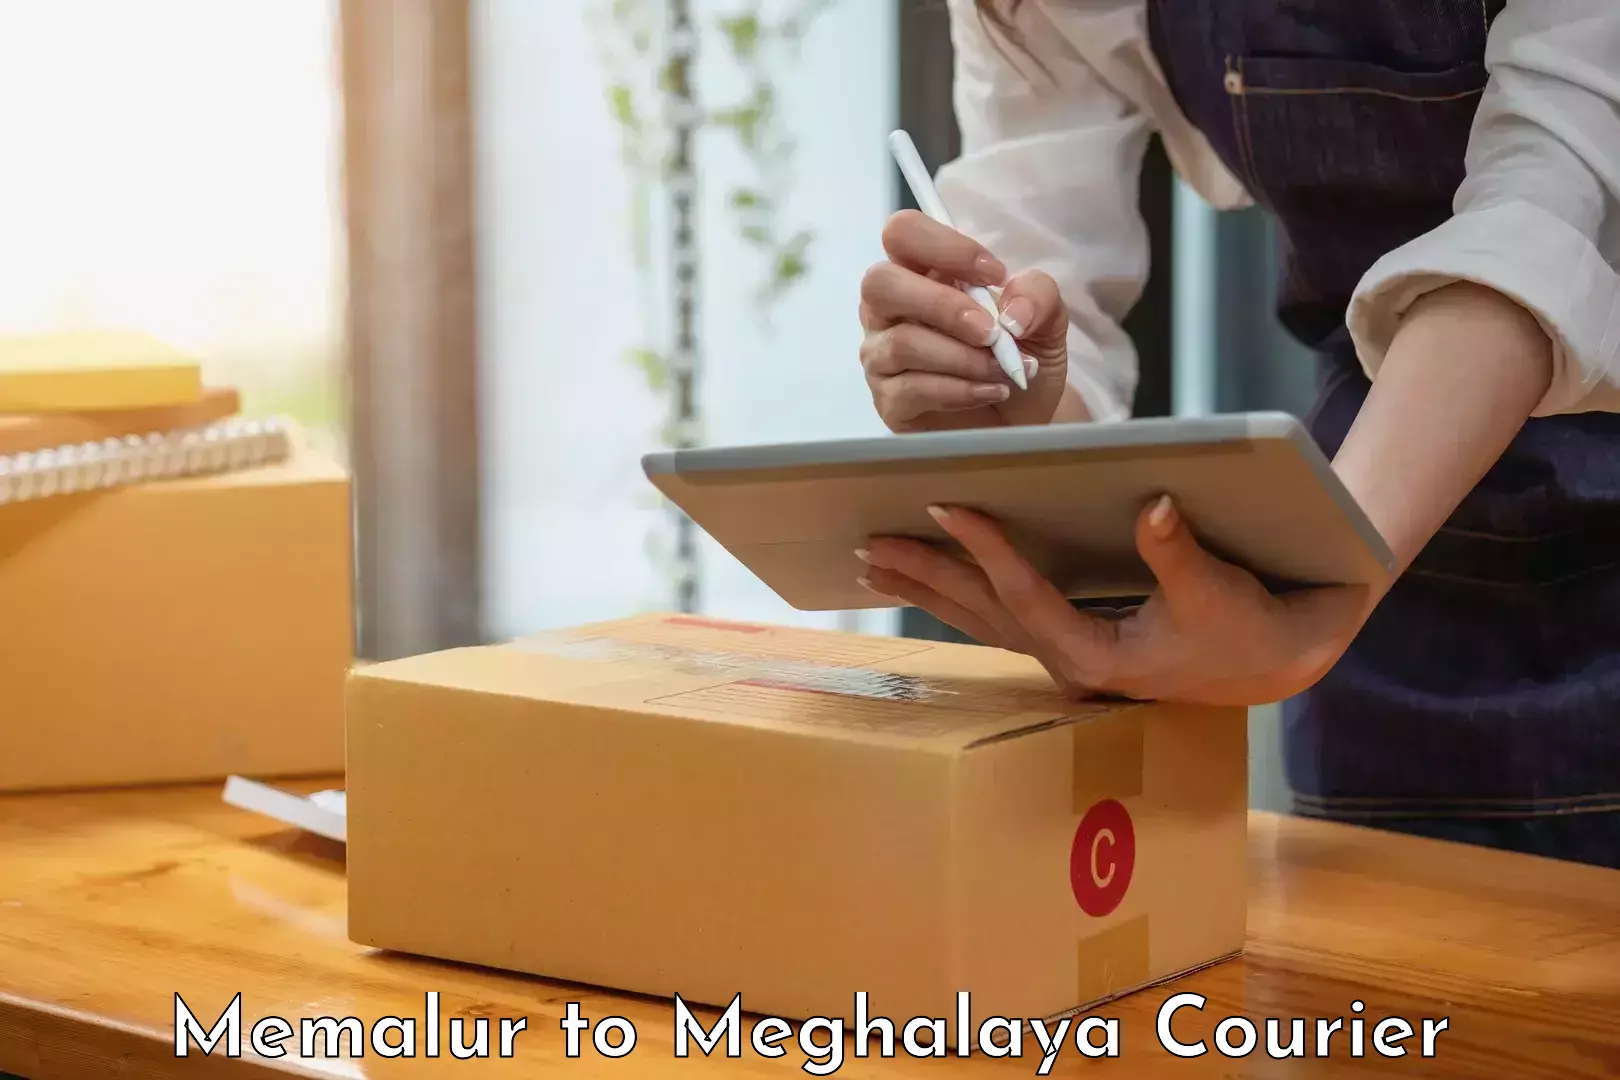 Courier service comparison in Memalur to Meghalaya